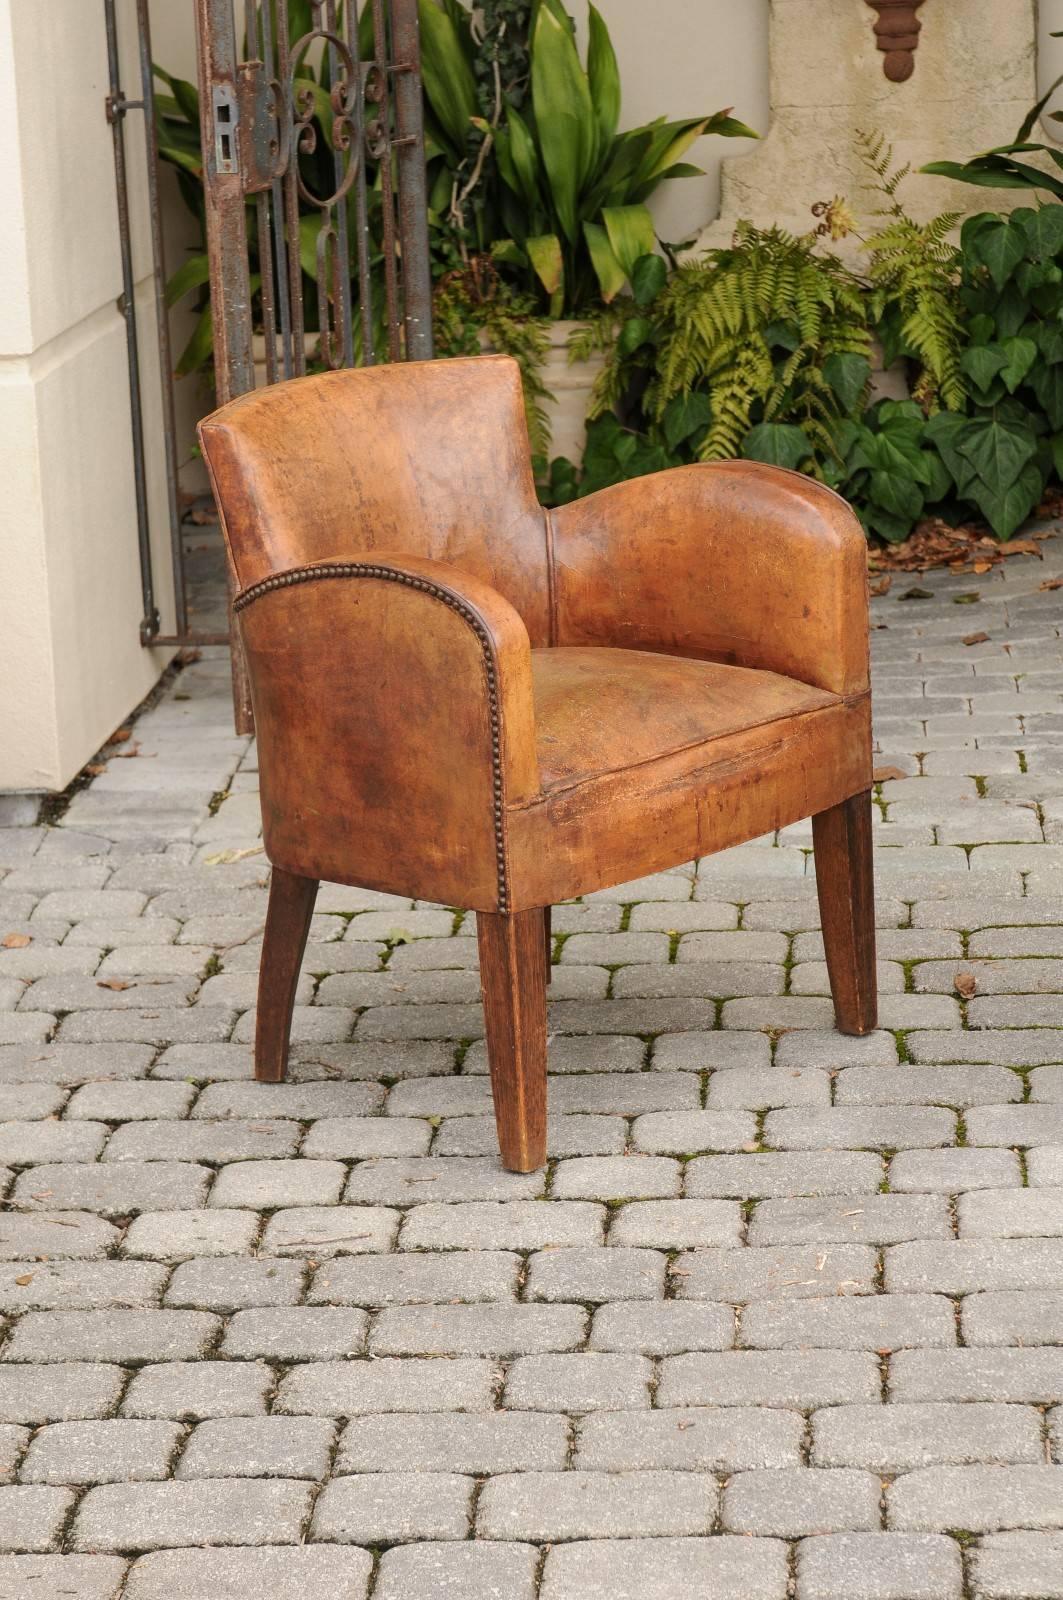 20th Century Pair of English Turn of the Century Leather Club Chairs with Nailhead Surround